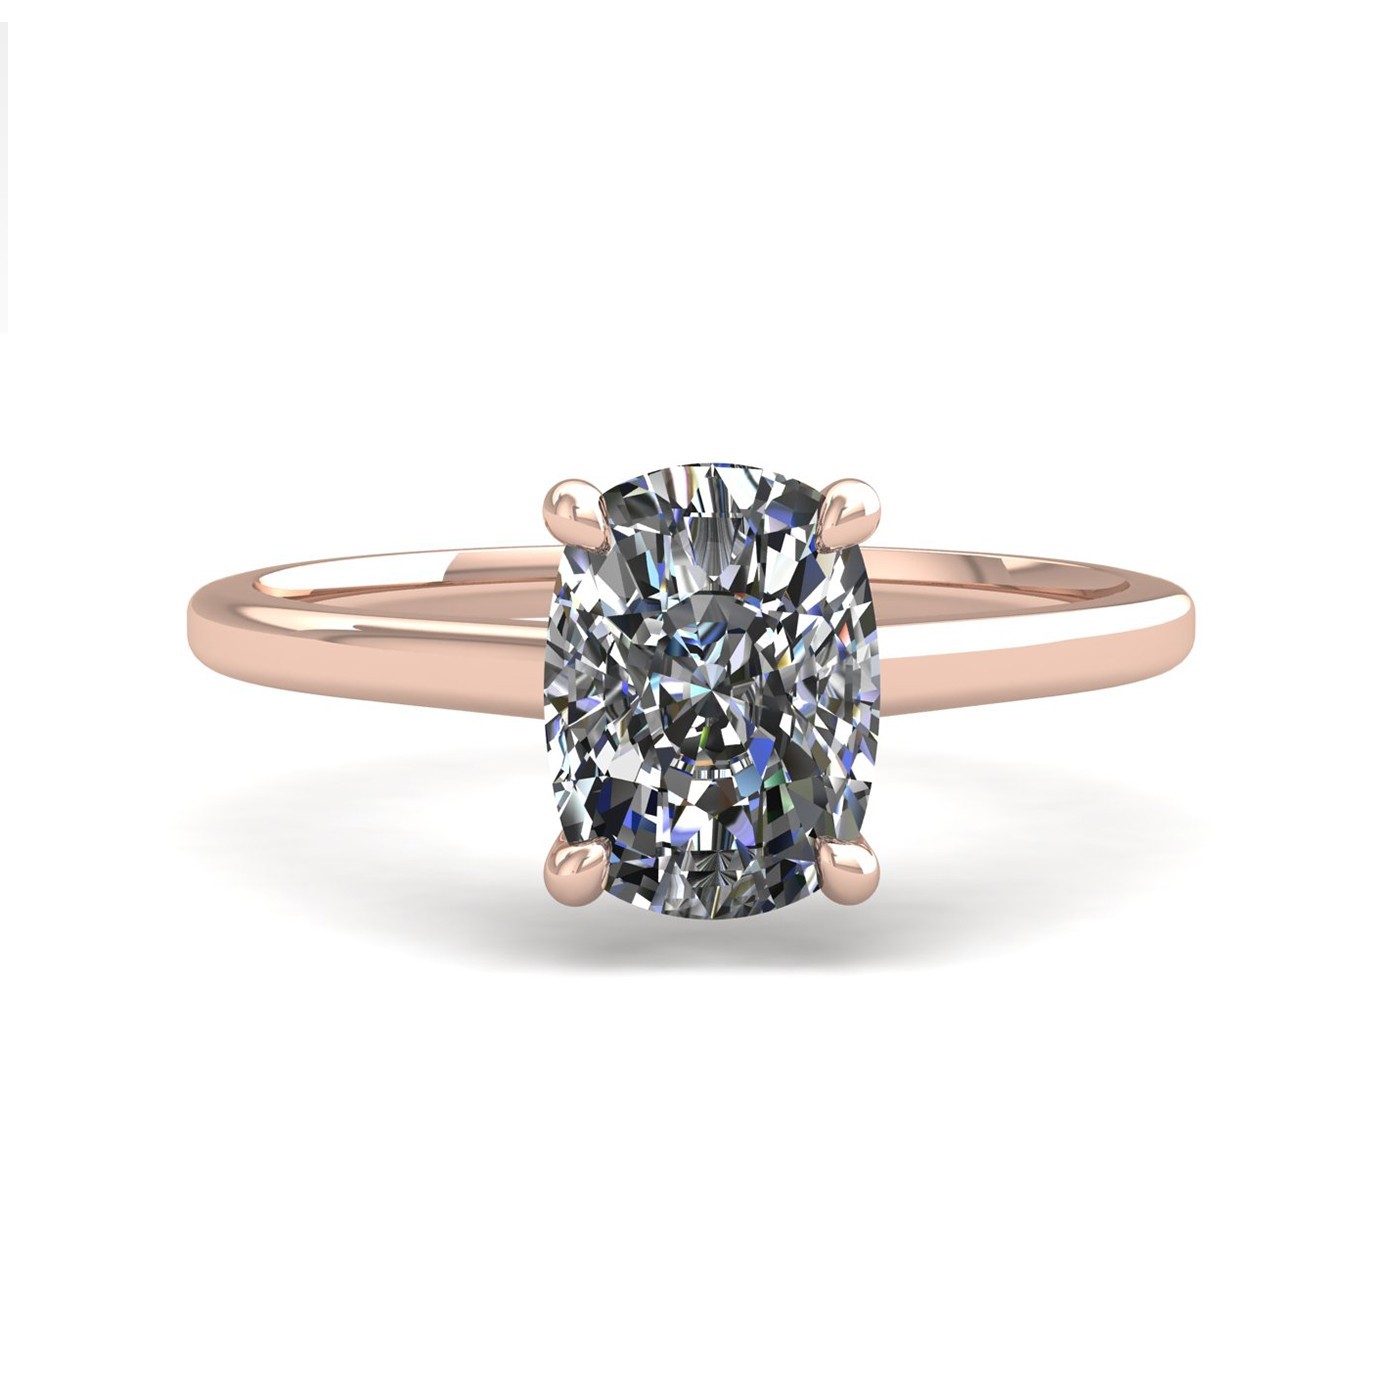 18k rose gold 1,00 ct 4 prongs solitaire elongated cushion cut diamond engagement ring with whisper thin band Photos & images